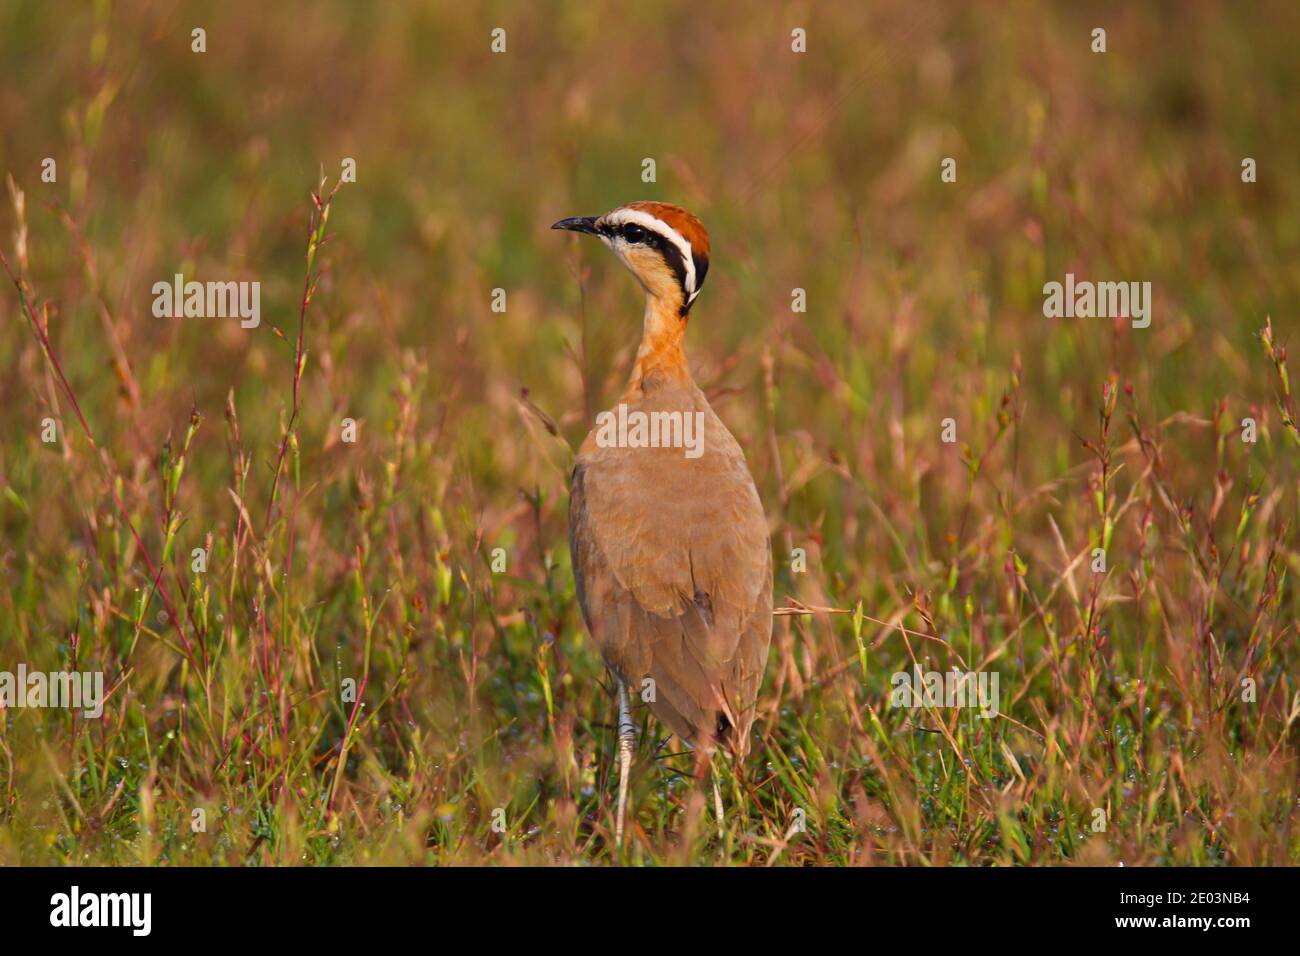 Indian courser standing in meadows Stock Photo